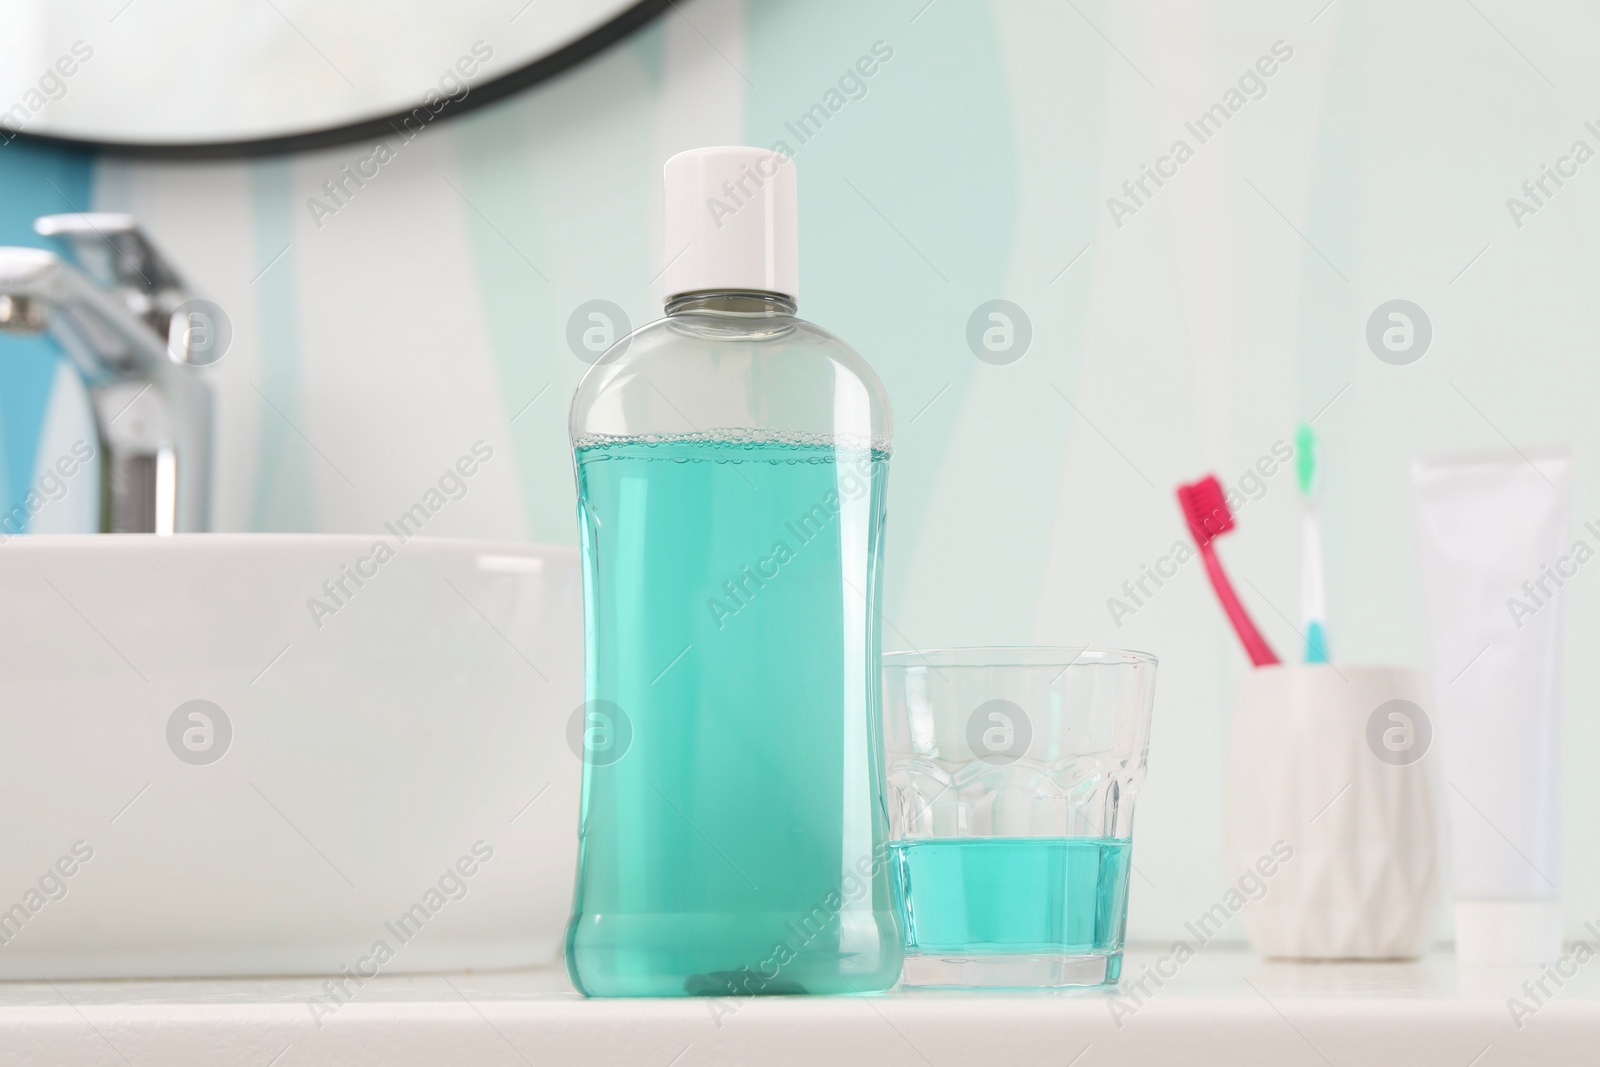 Photo of Bottle of mouthwash, toothbrushes and glass on white table in bathroom